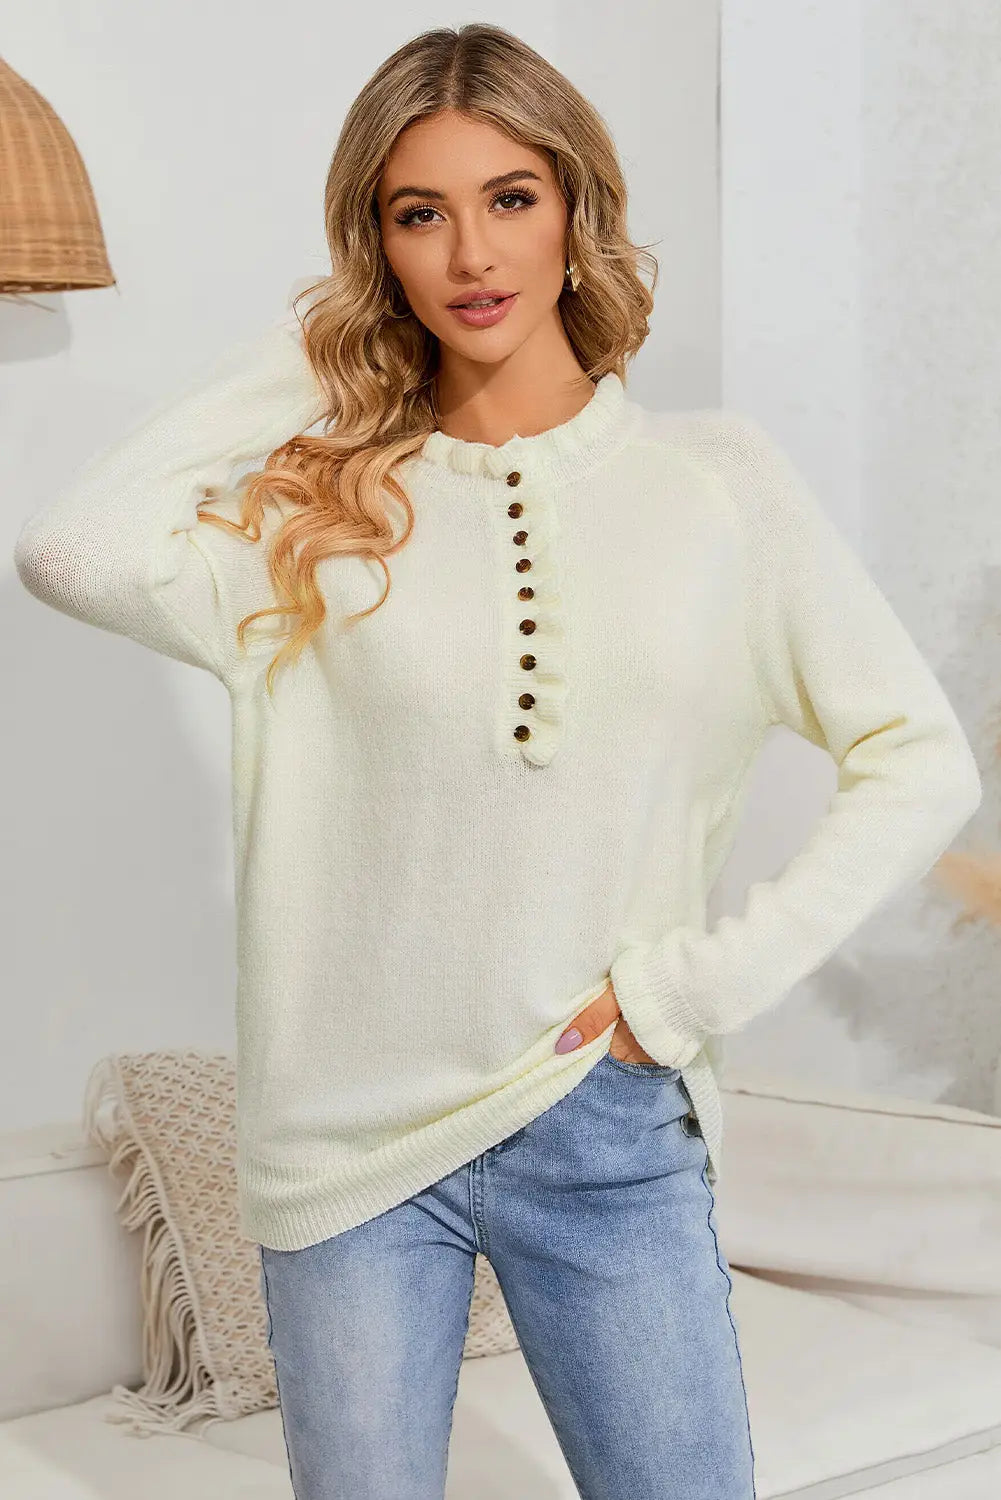 Beige frill trim buttoned knit pullover sweater - s 48% acrylic + 32% polyamide + 20% polyester sweaters & cardigans